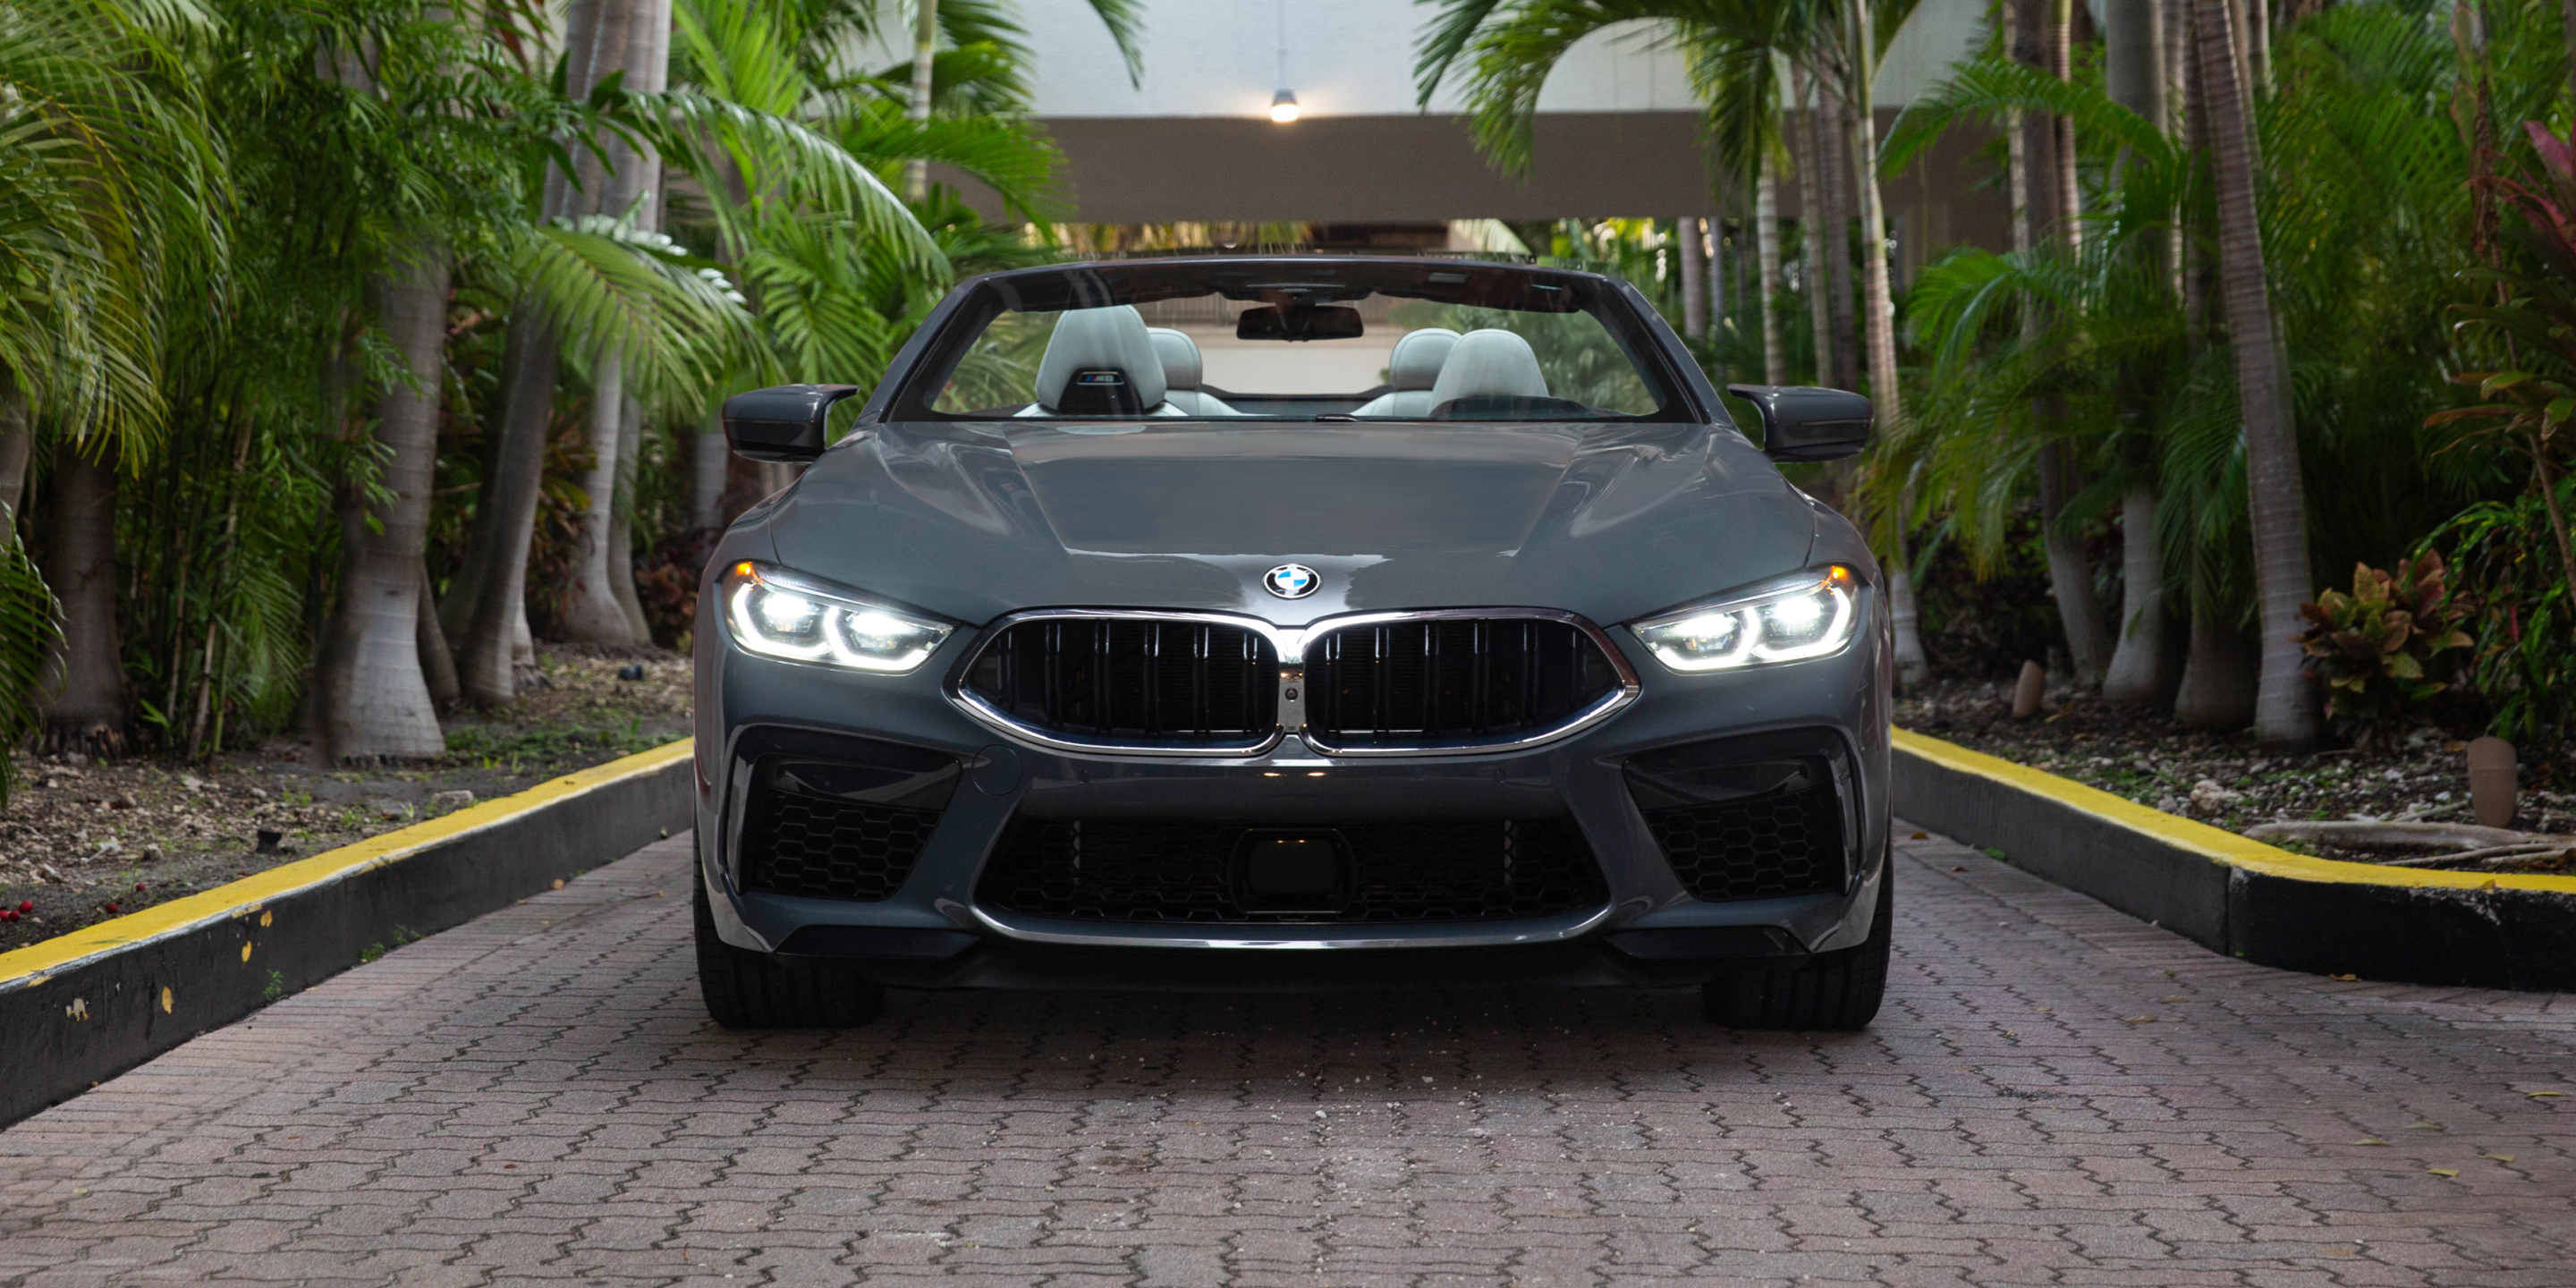 RealCar BMW 840i Convertible for rental